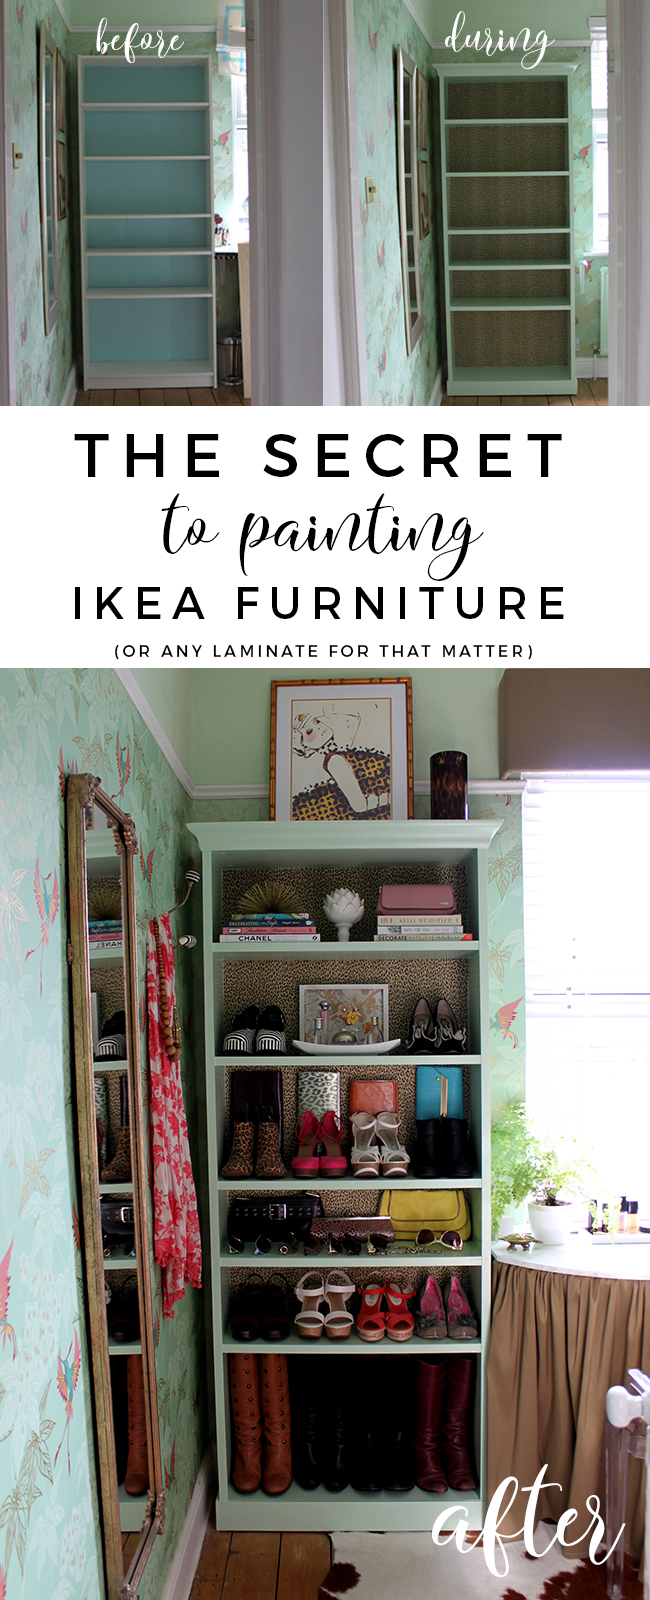 Want to find out the Secret To Painting Ikea Furniture? Check out my tips on making beautiful personalised pieces.